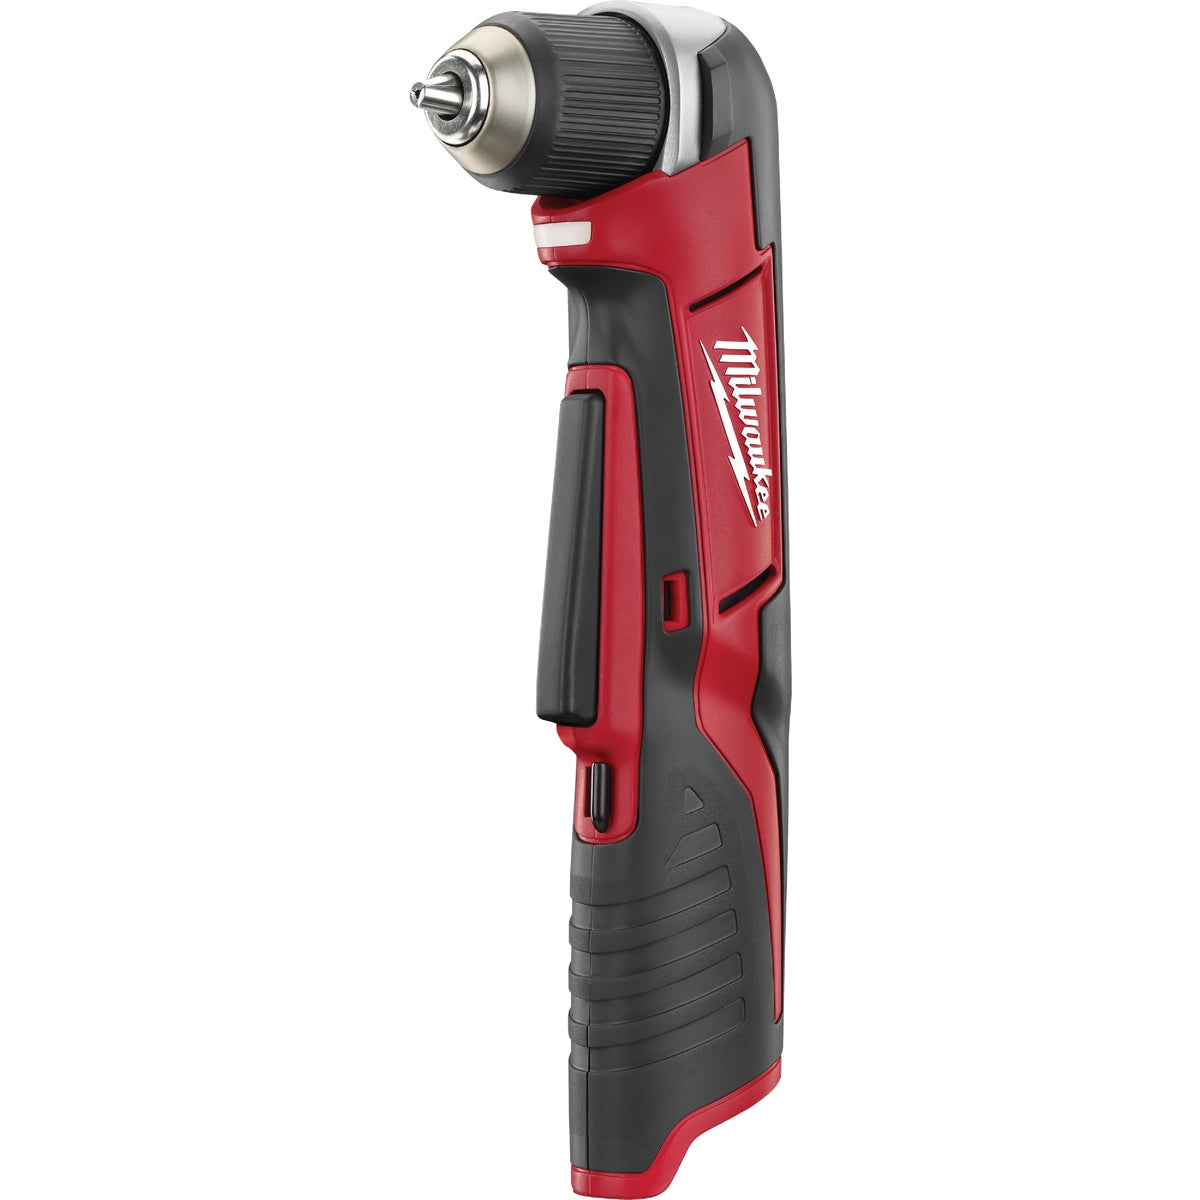 Item 303689, Work more efficiently with the most versatile right angle drill/driver on 